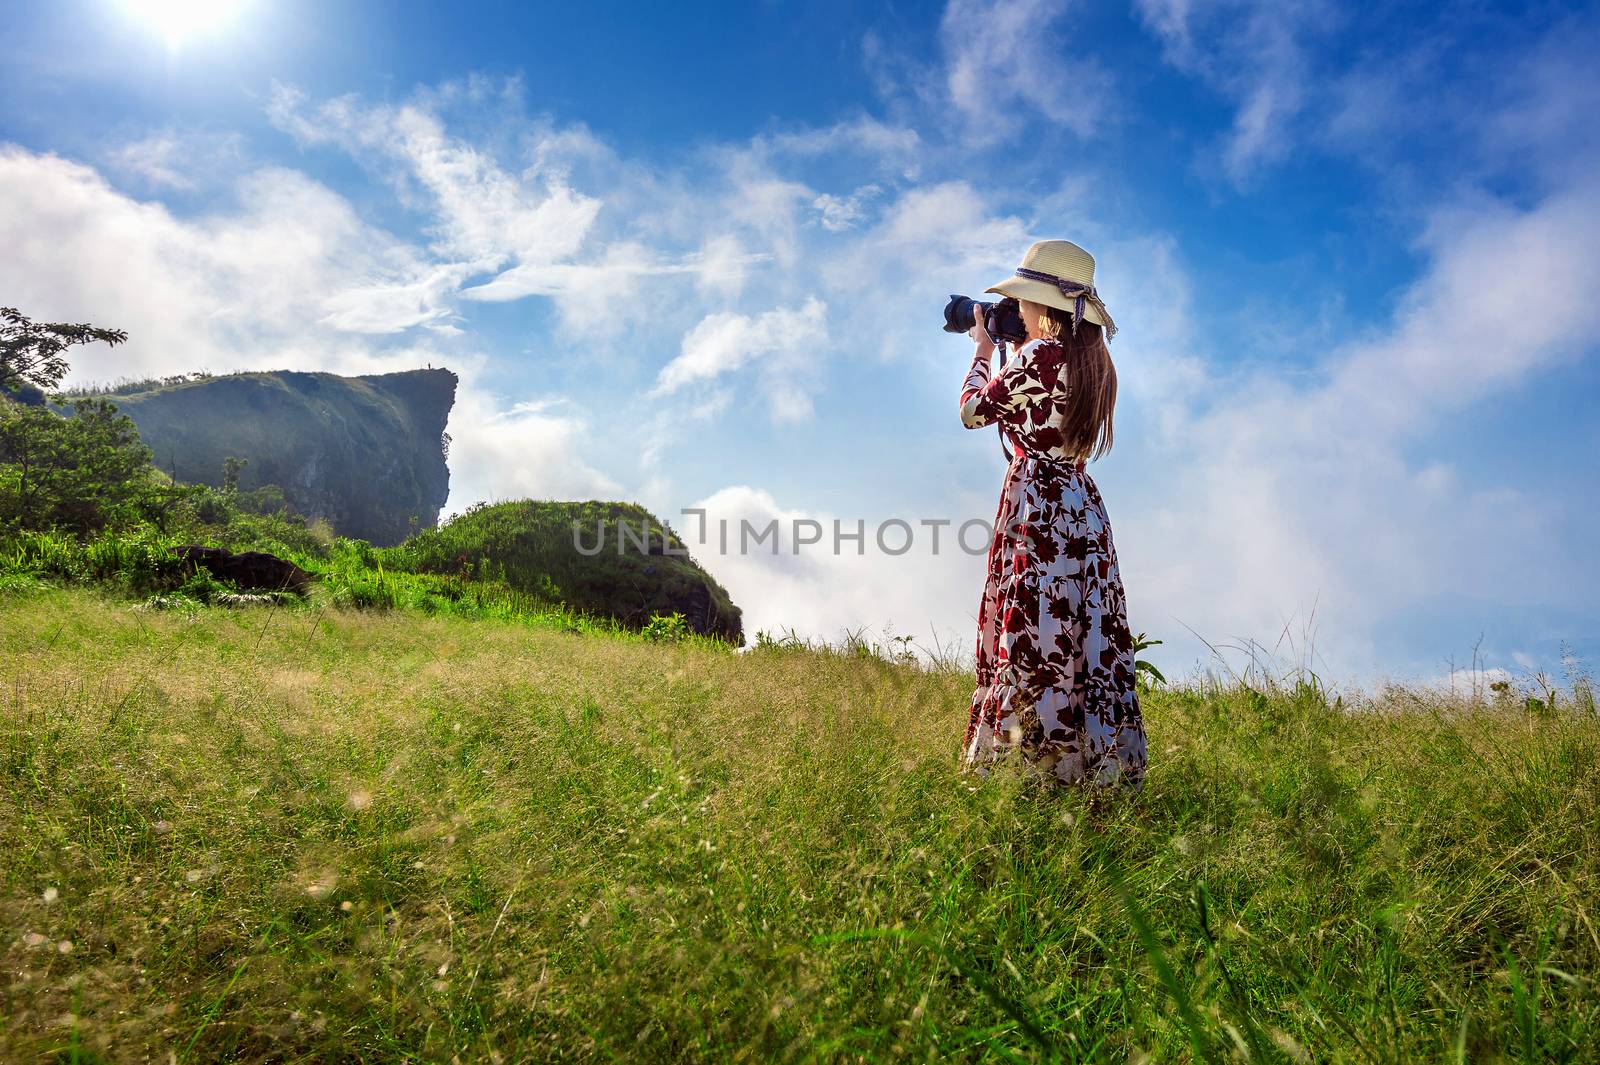 Woman standing on meadow and holding camera take photo at Phu Chi Fa mountains in Chiangrai, Thailand. Travel concept. by gutarphotoghaphy